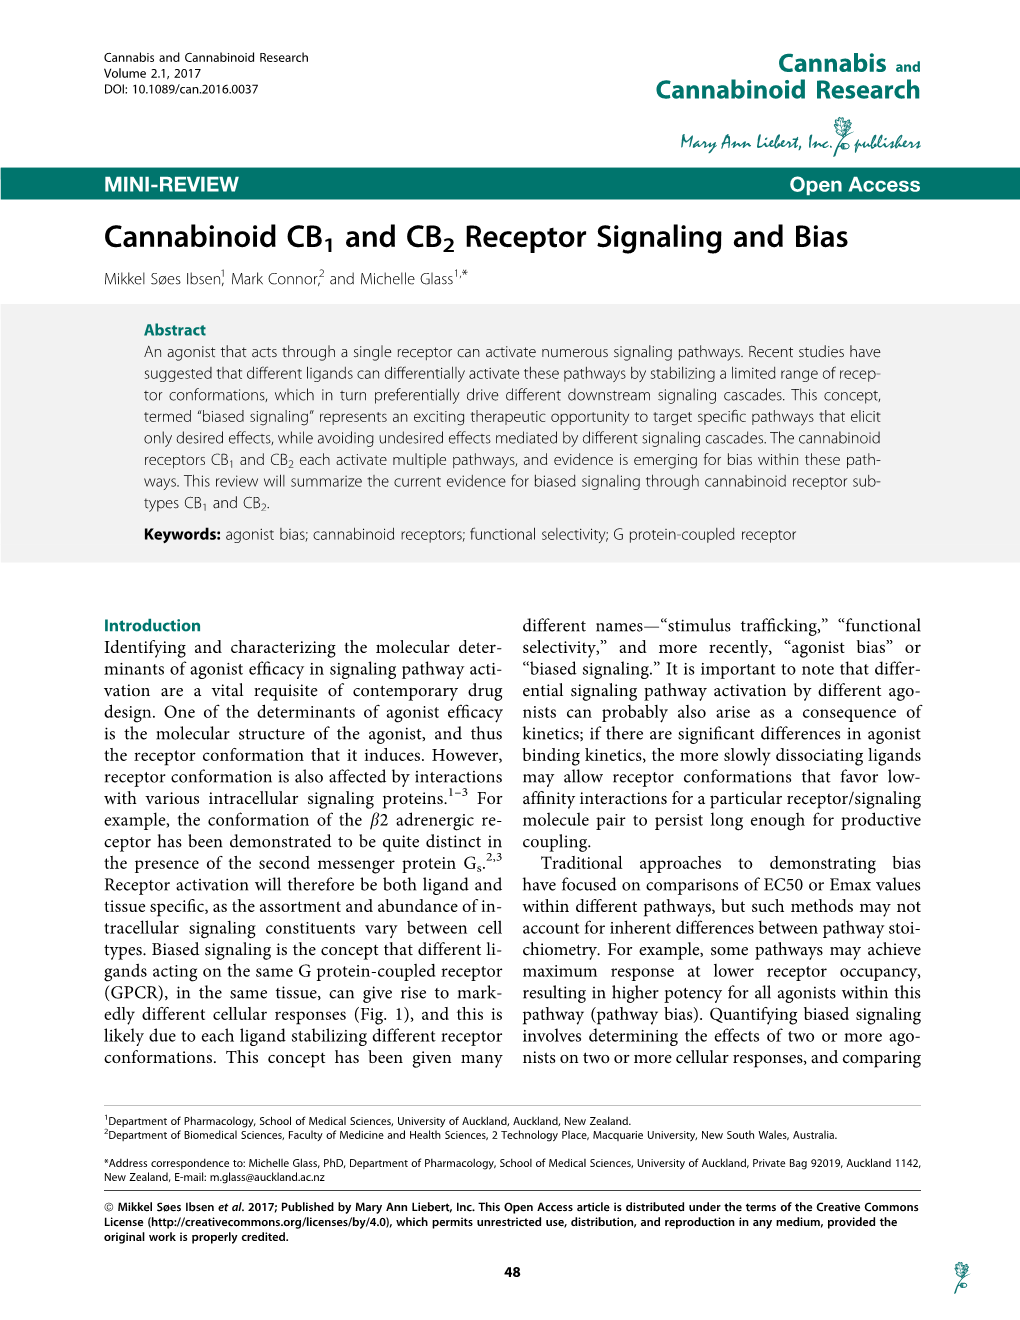 Cannabinoid CB1 and CB2 Receptor Signaling and Bias Mikkel Søes Ibsen,1 Mark Connor,2 and Michelle Glass1,*